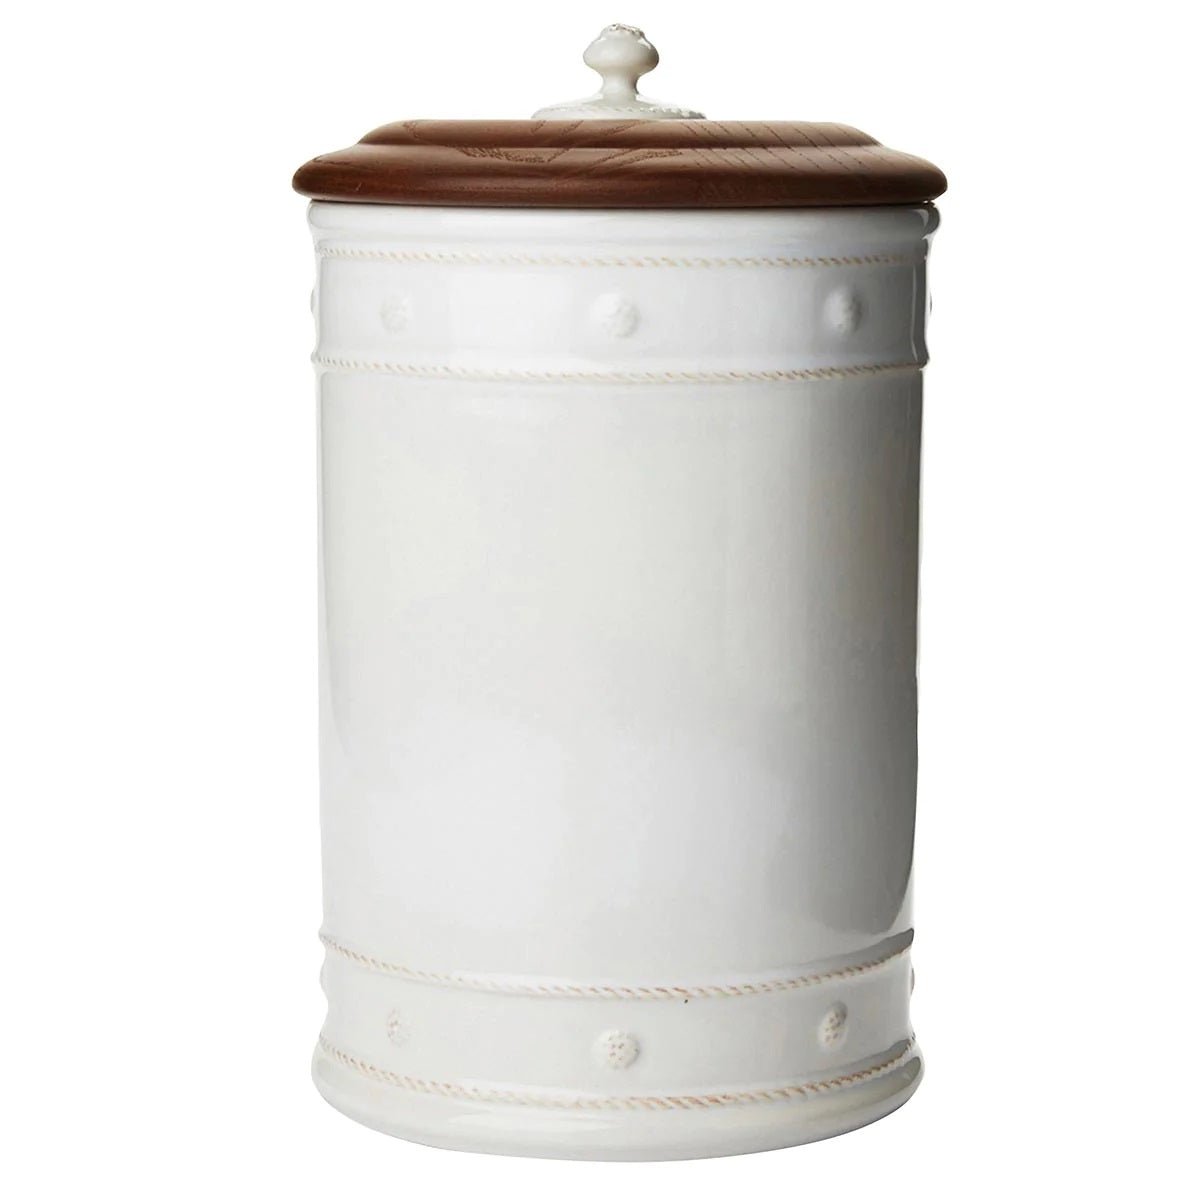 Berry & Thread Canister with Wooden Lid - Whitewash - Gaines Jewelers